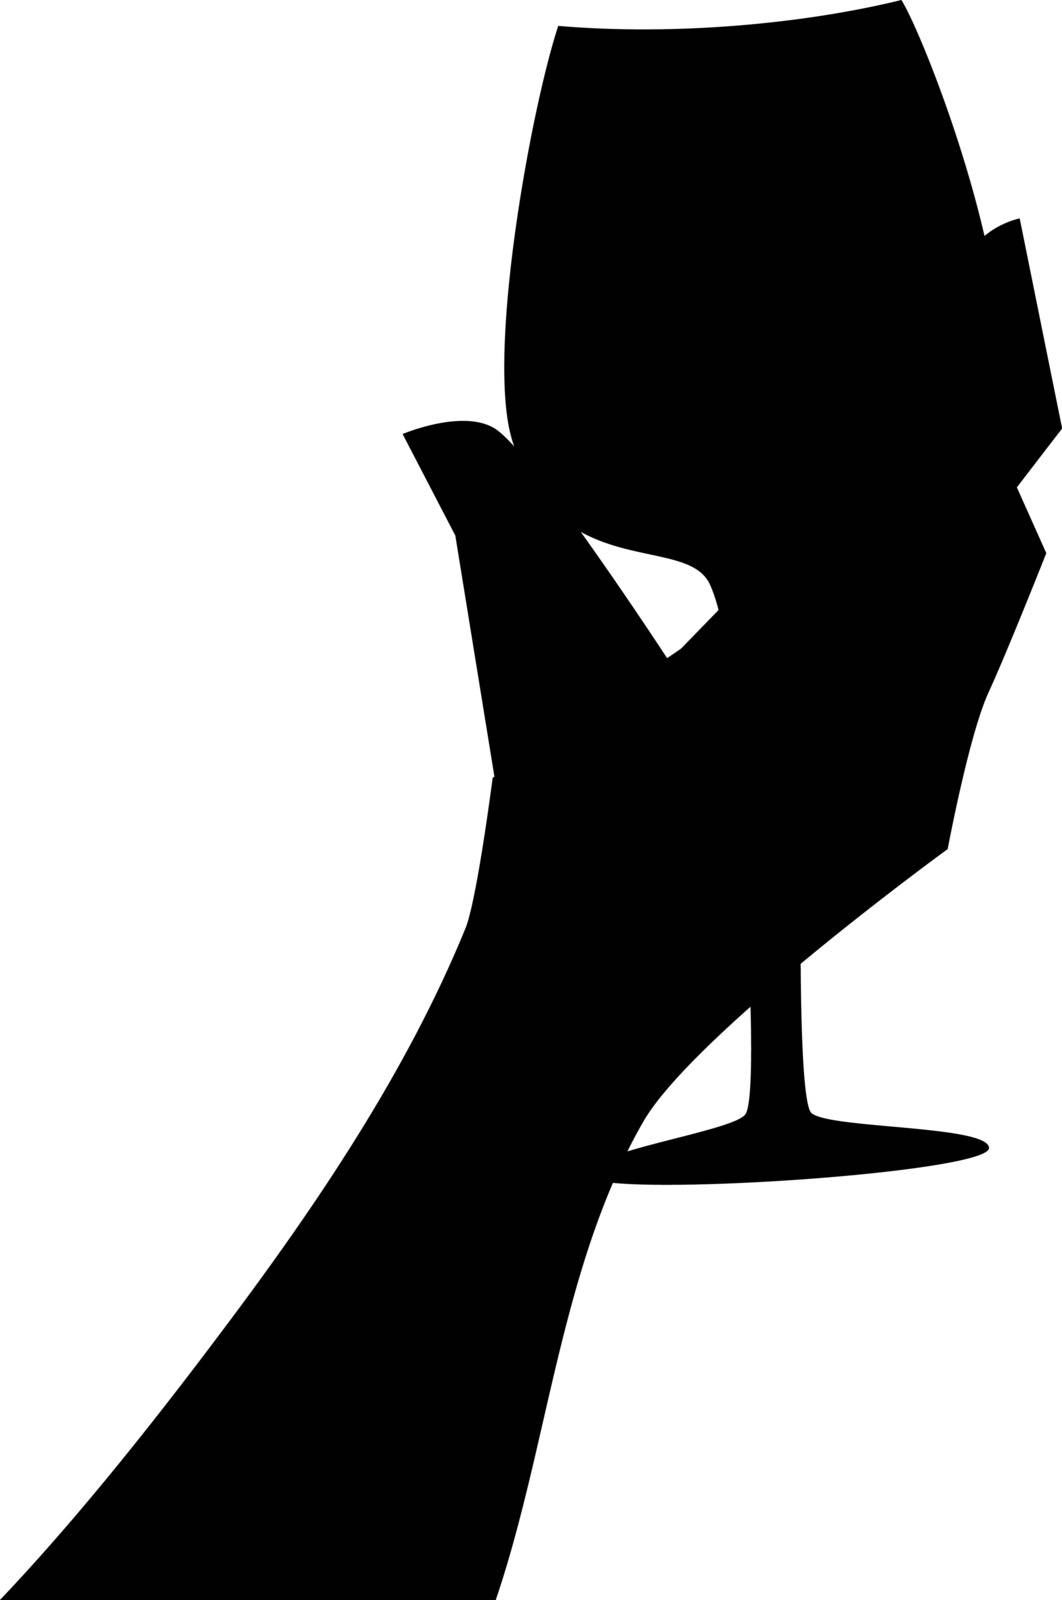 Hand with a glass. Drinking wine. Silhouette vector illustration